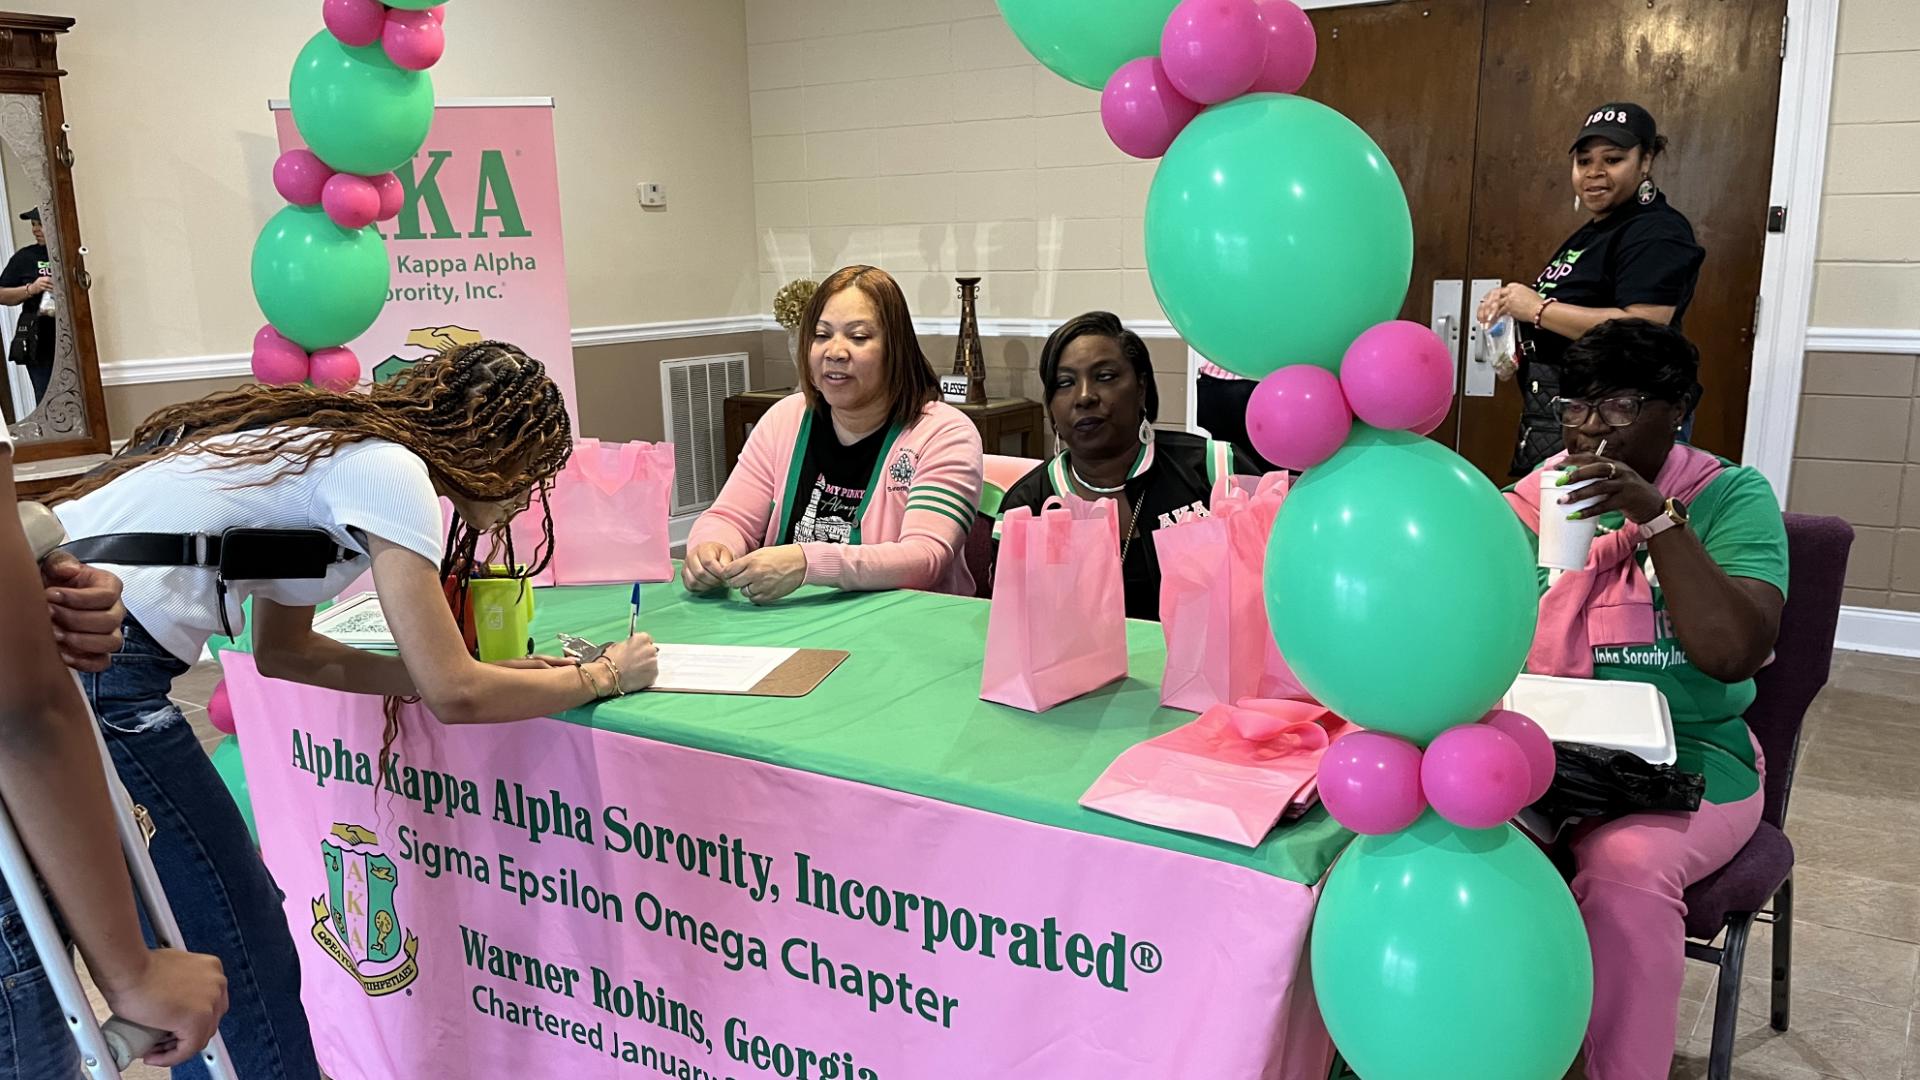 AKA sorority hosted the event on Saturday.